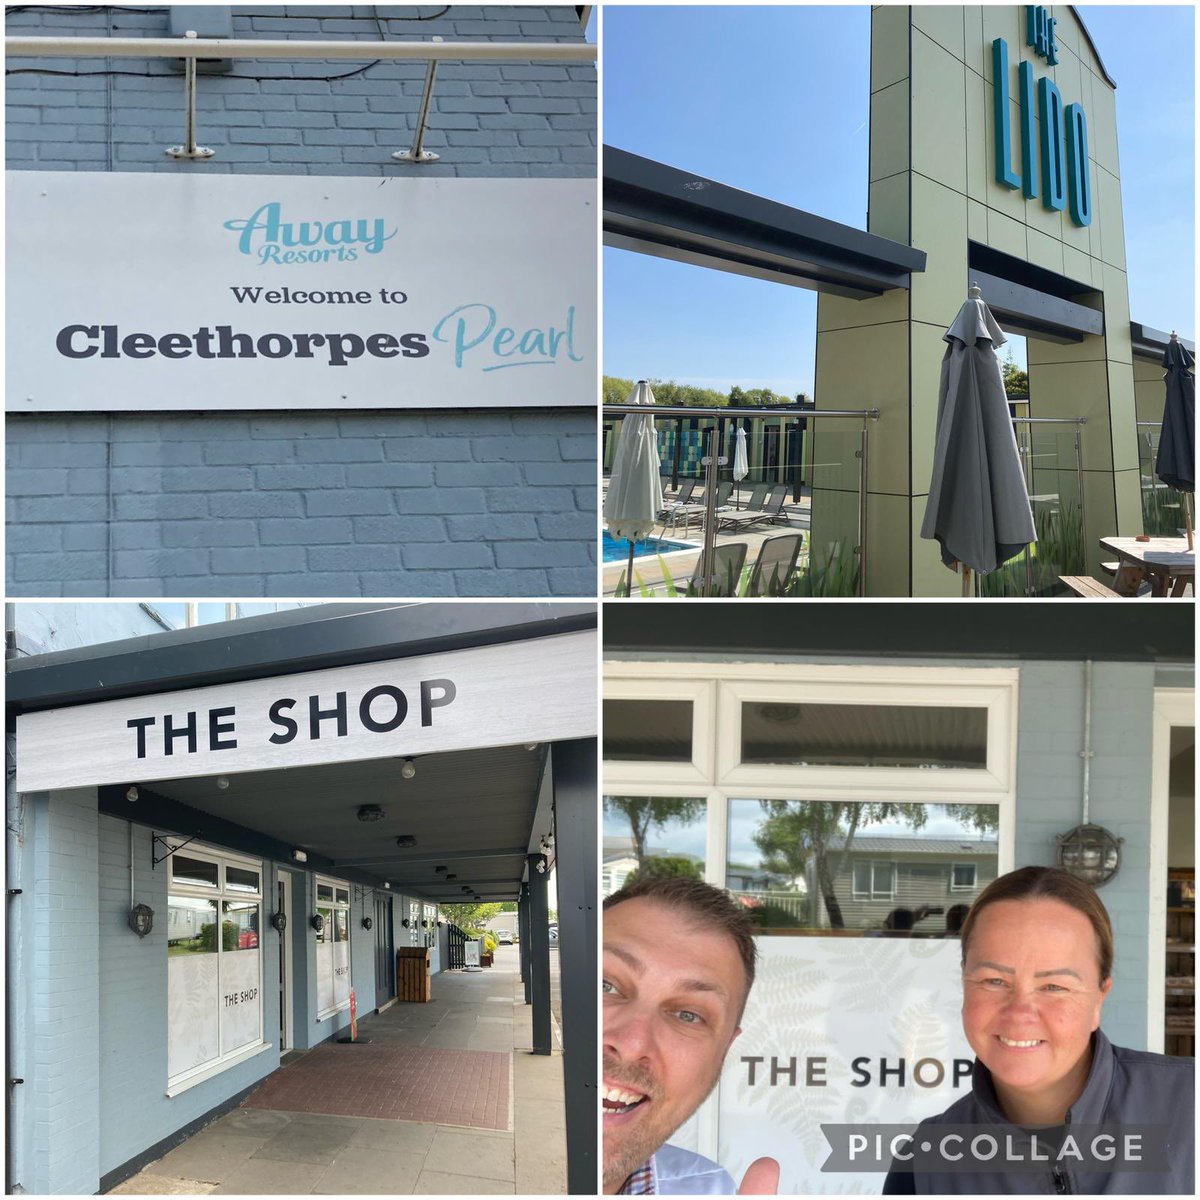 Great to visit @AwayResortsUK #Cleethorps and the #shop supporting #indi retailing @NisaRetail thank you for the tour ! I’ll bring my trunks next time 🩲💦🏊🏻☀️☀️☀️